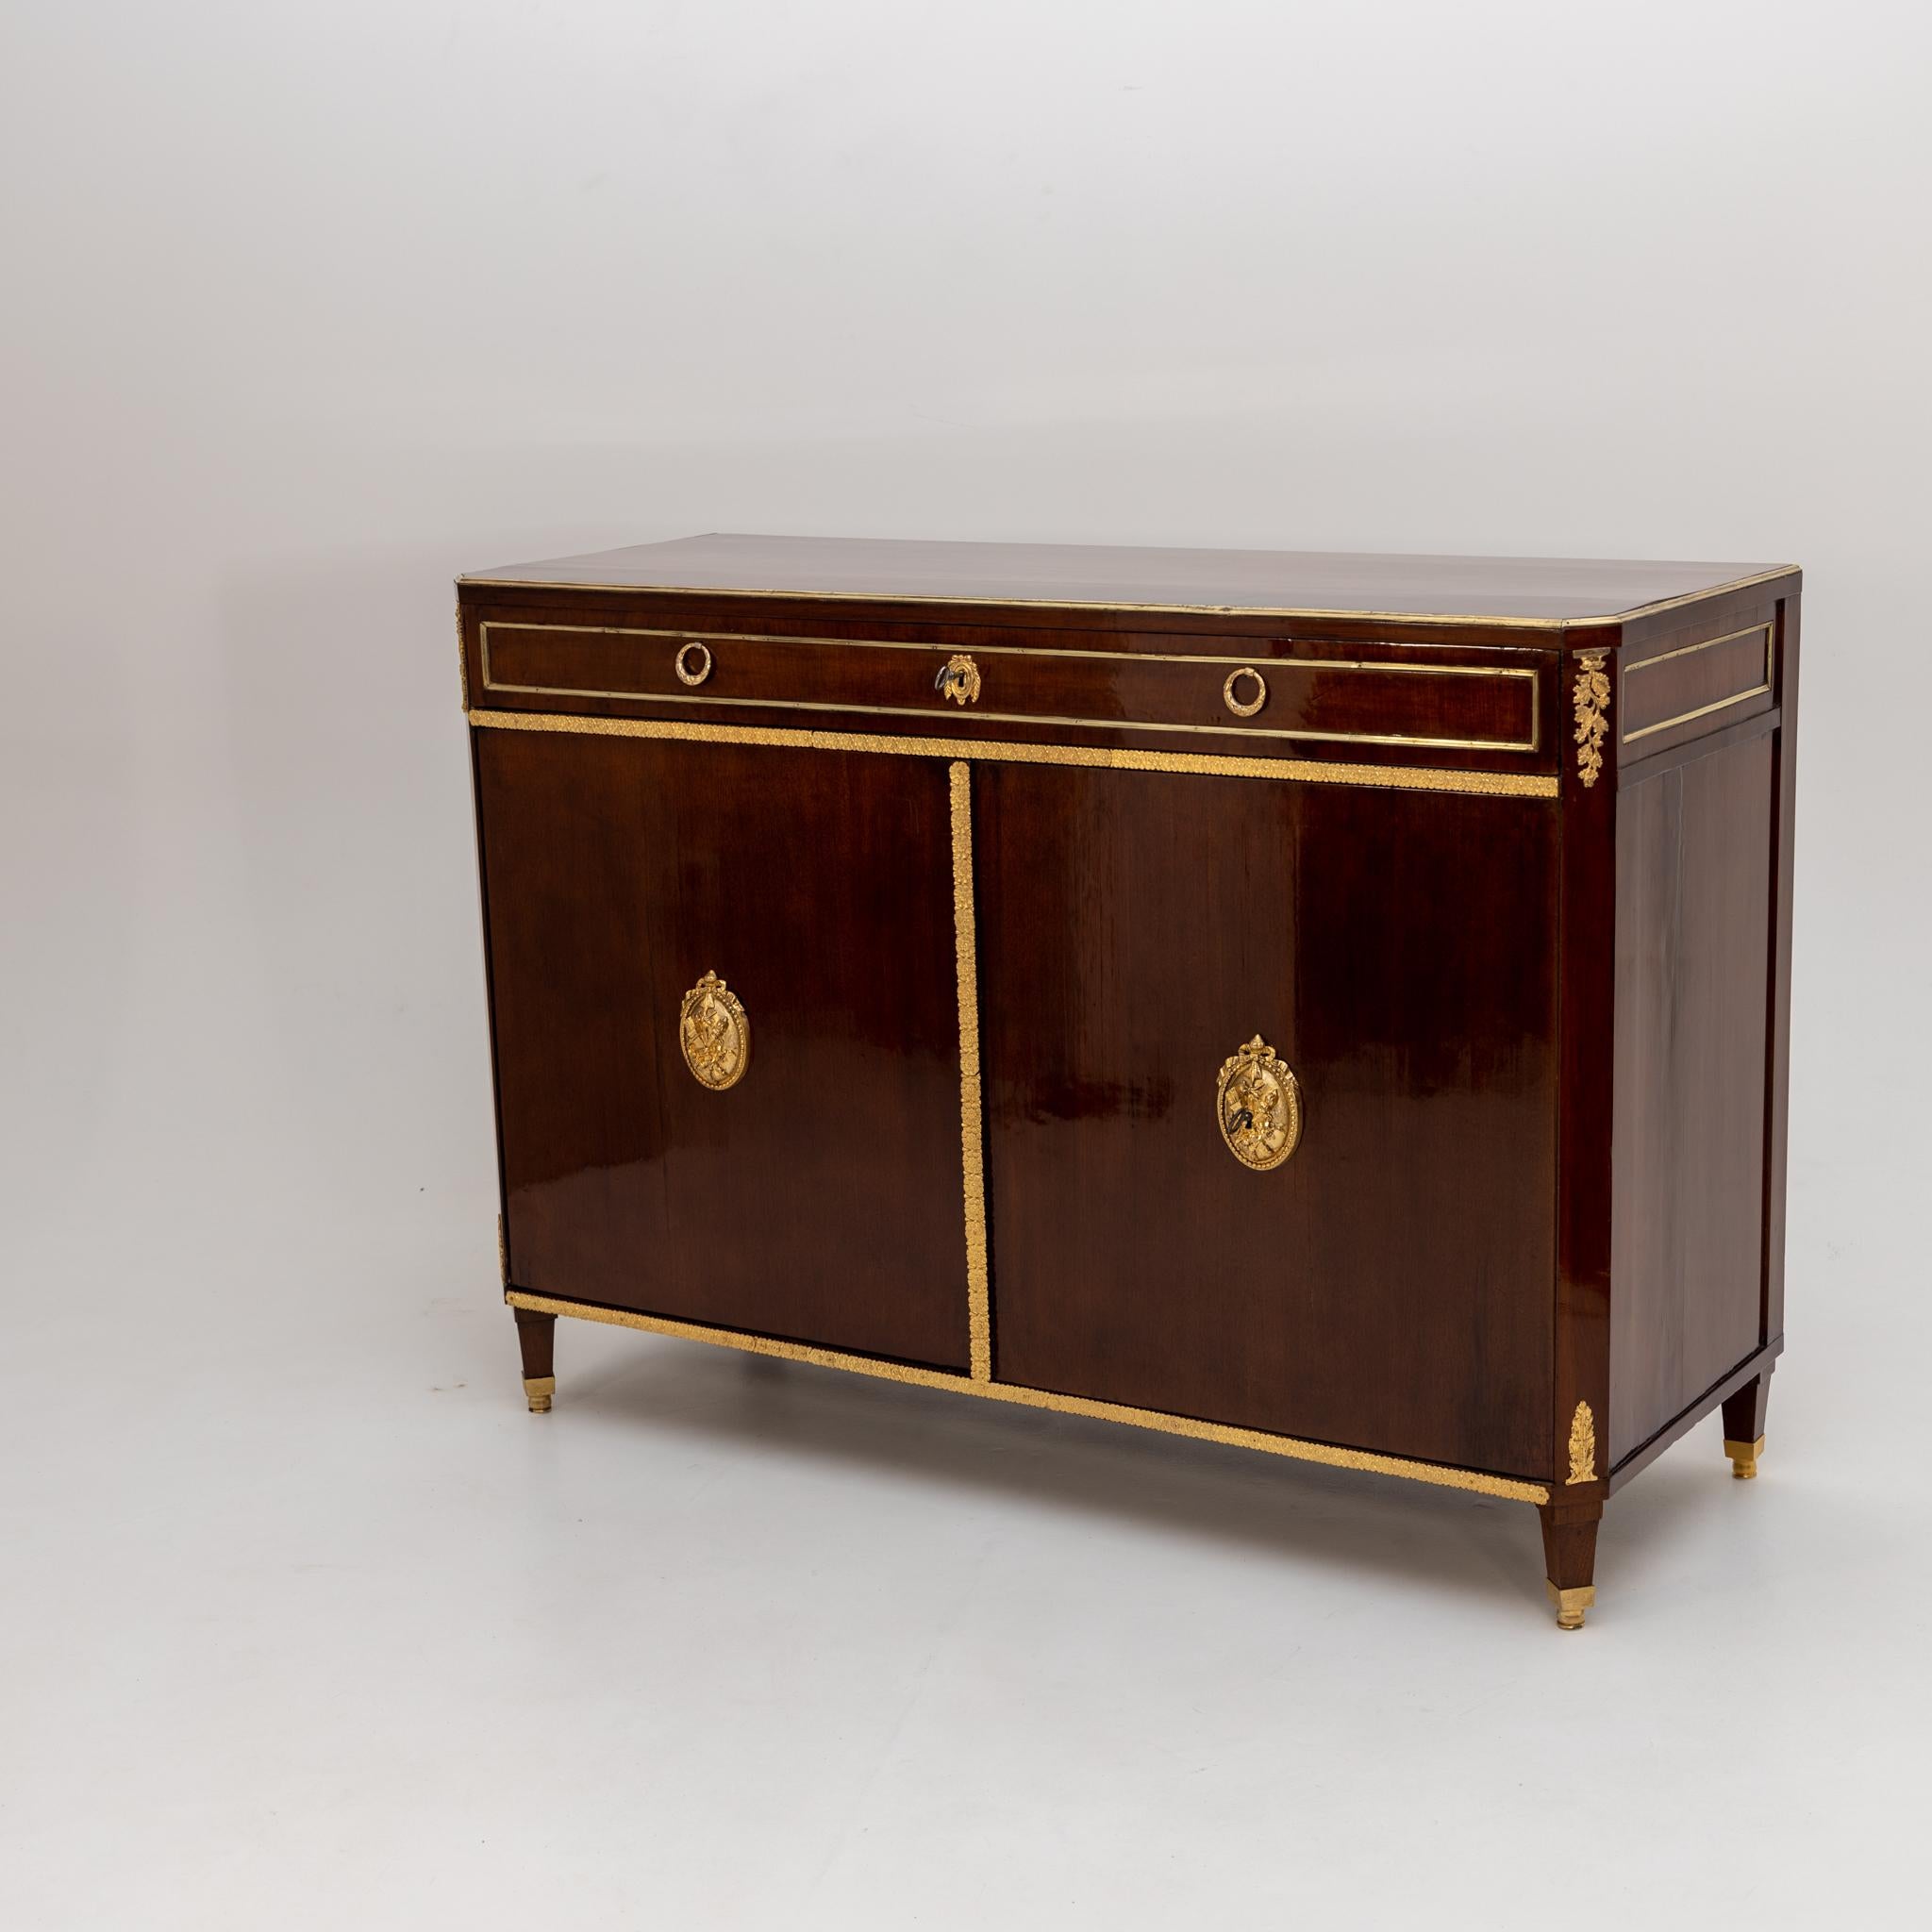 Two-door trumeau cabinet with one wide drawer and fire-gilt bronze fittings.